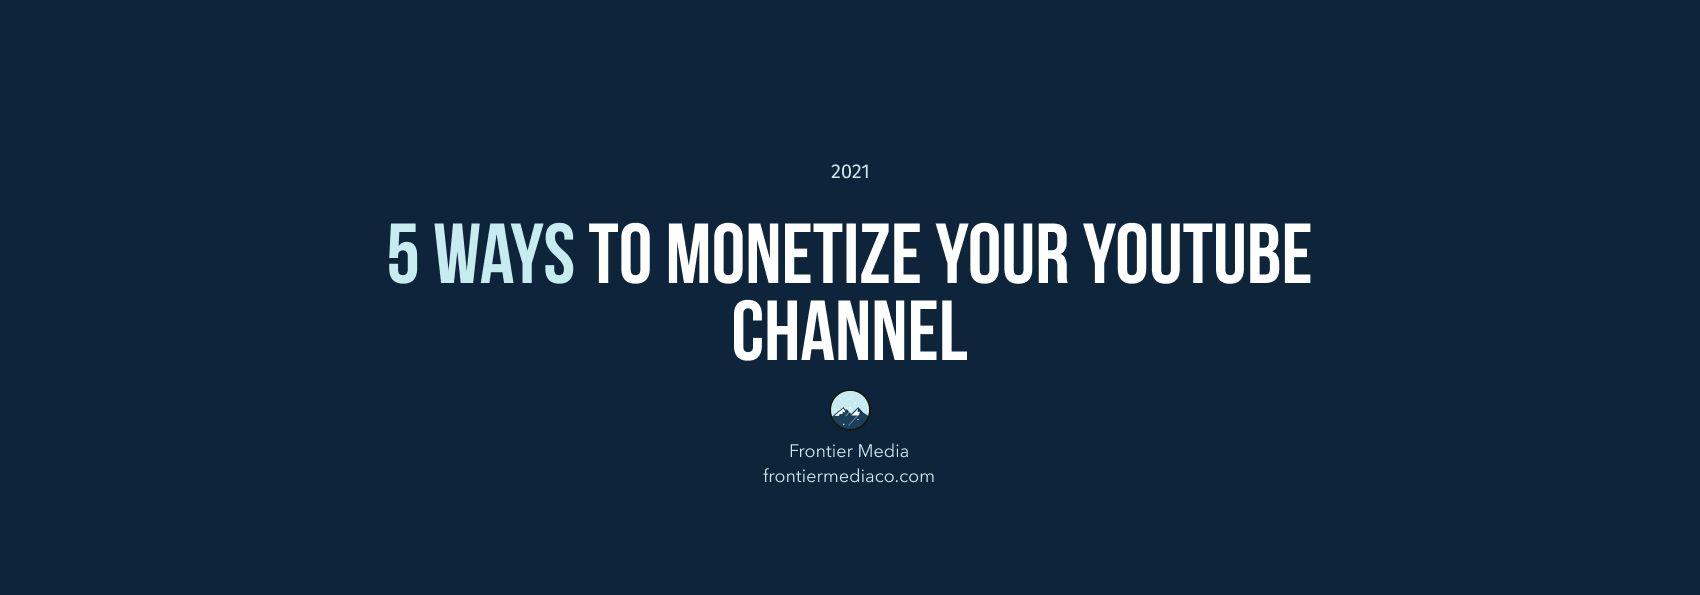 5 Ways to Monetize Your YouTube Channel